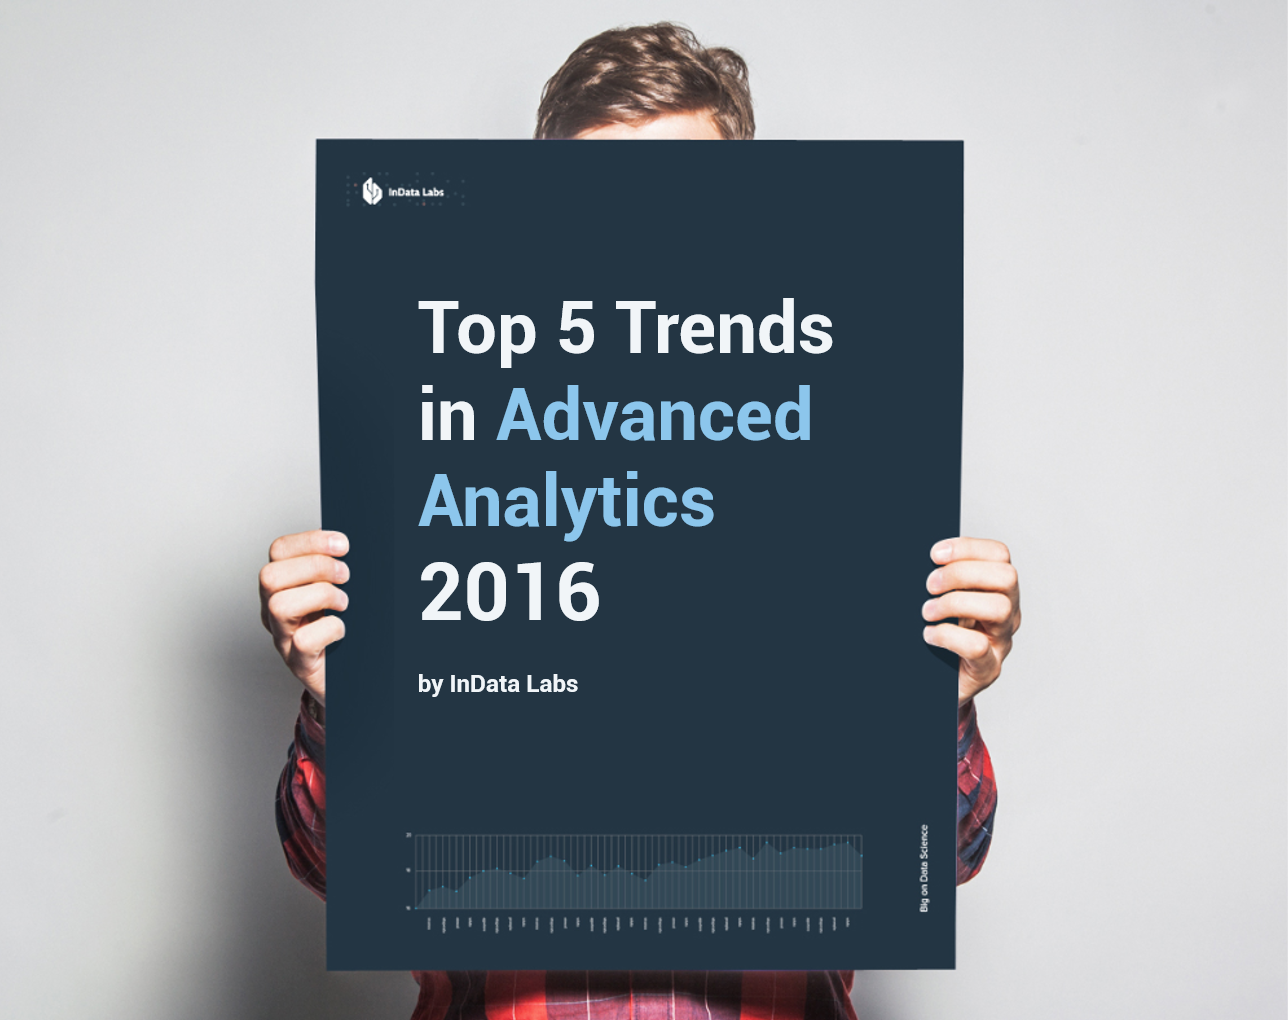 Top 5 Advanced Analytics Trends in 2016